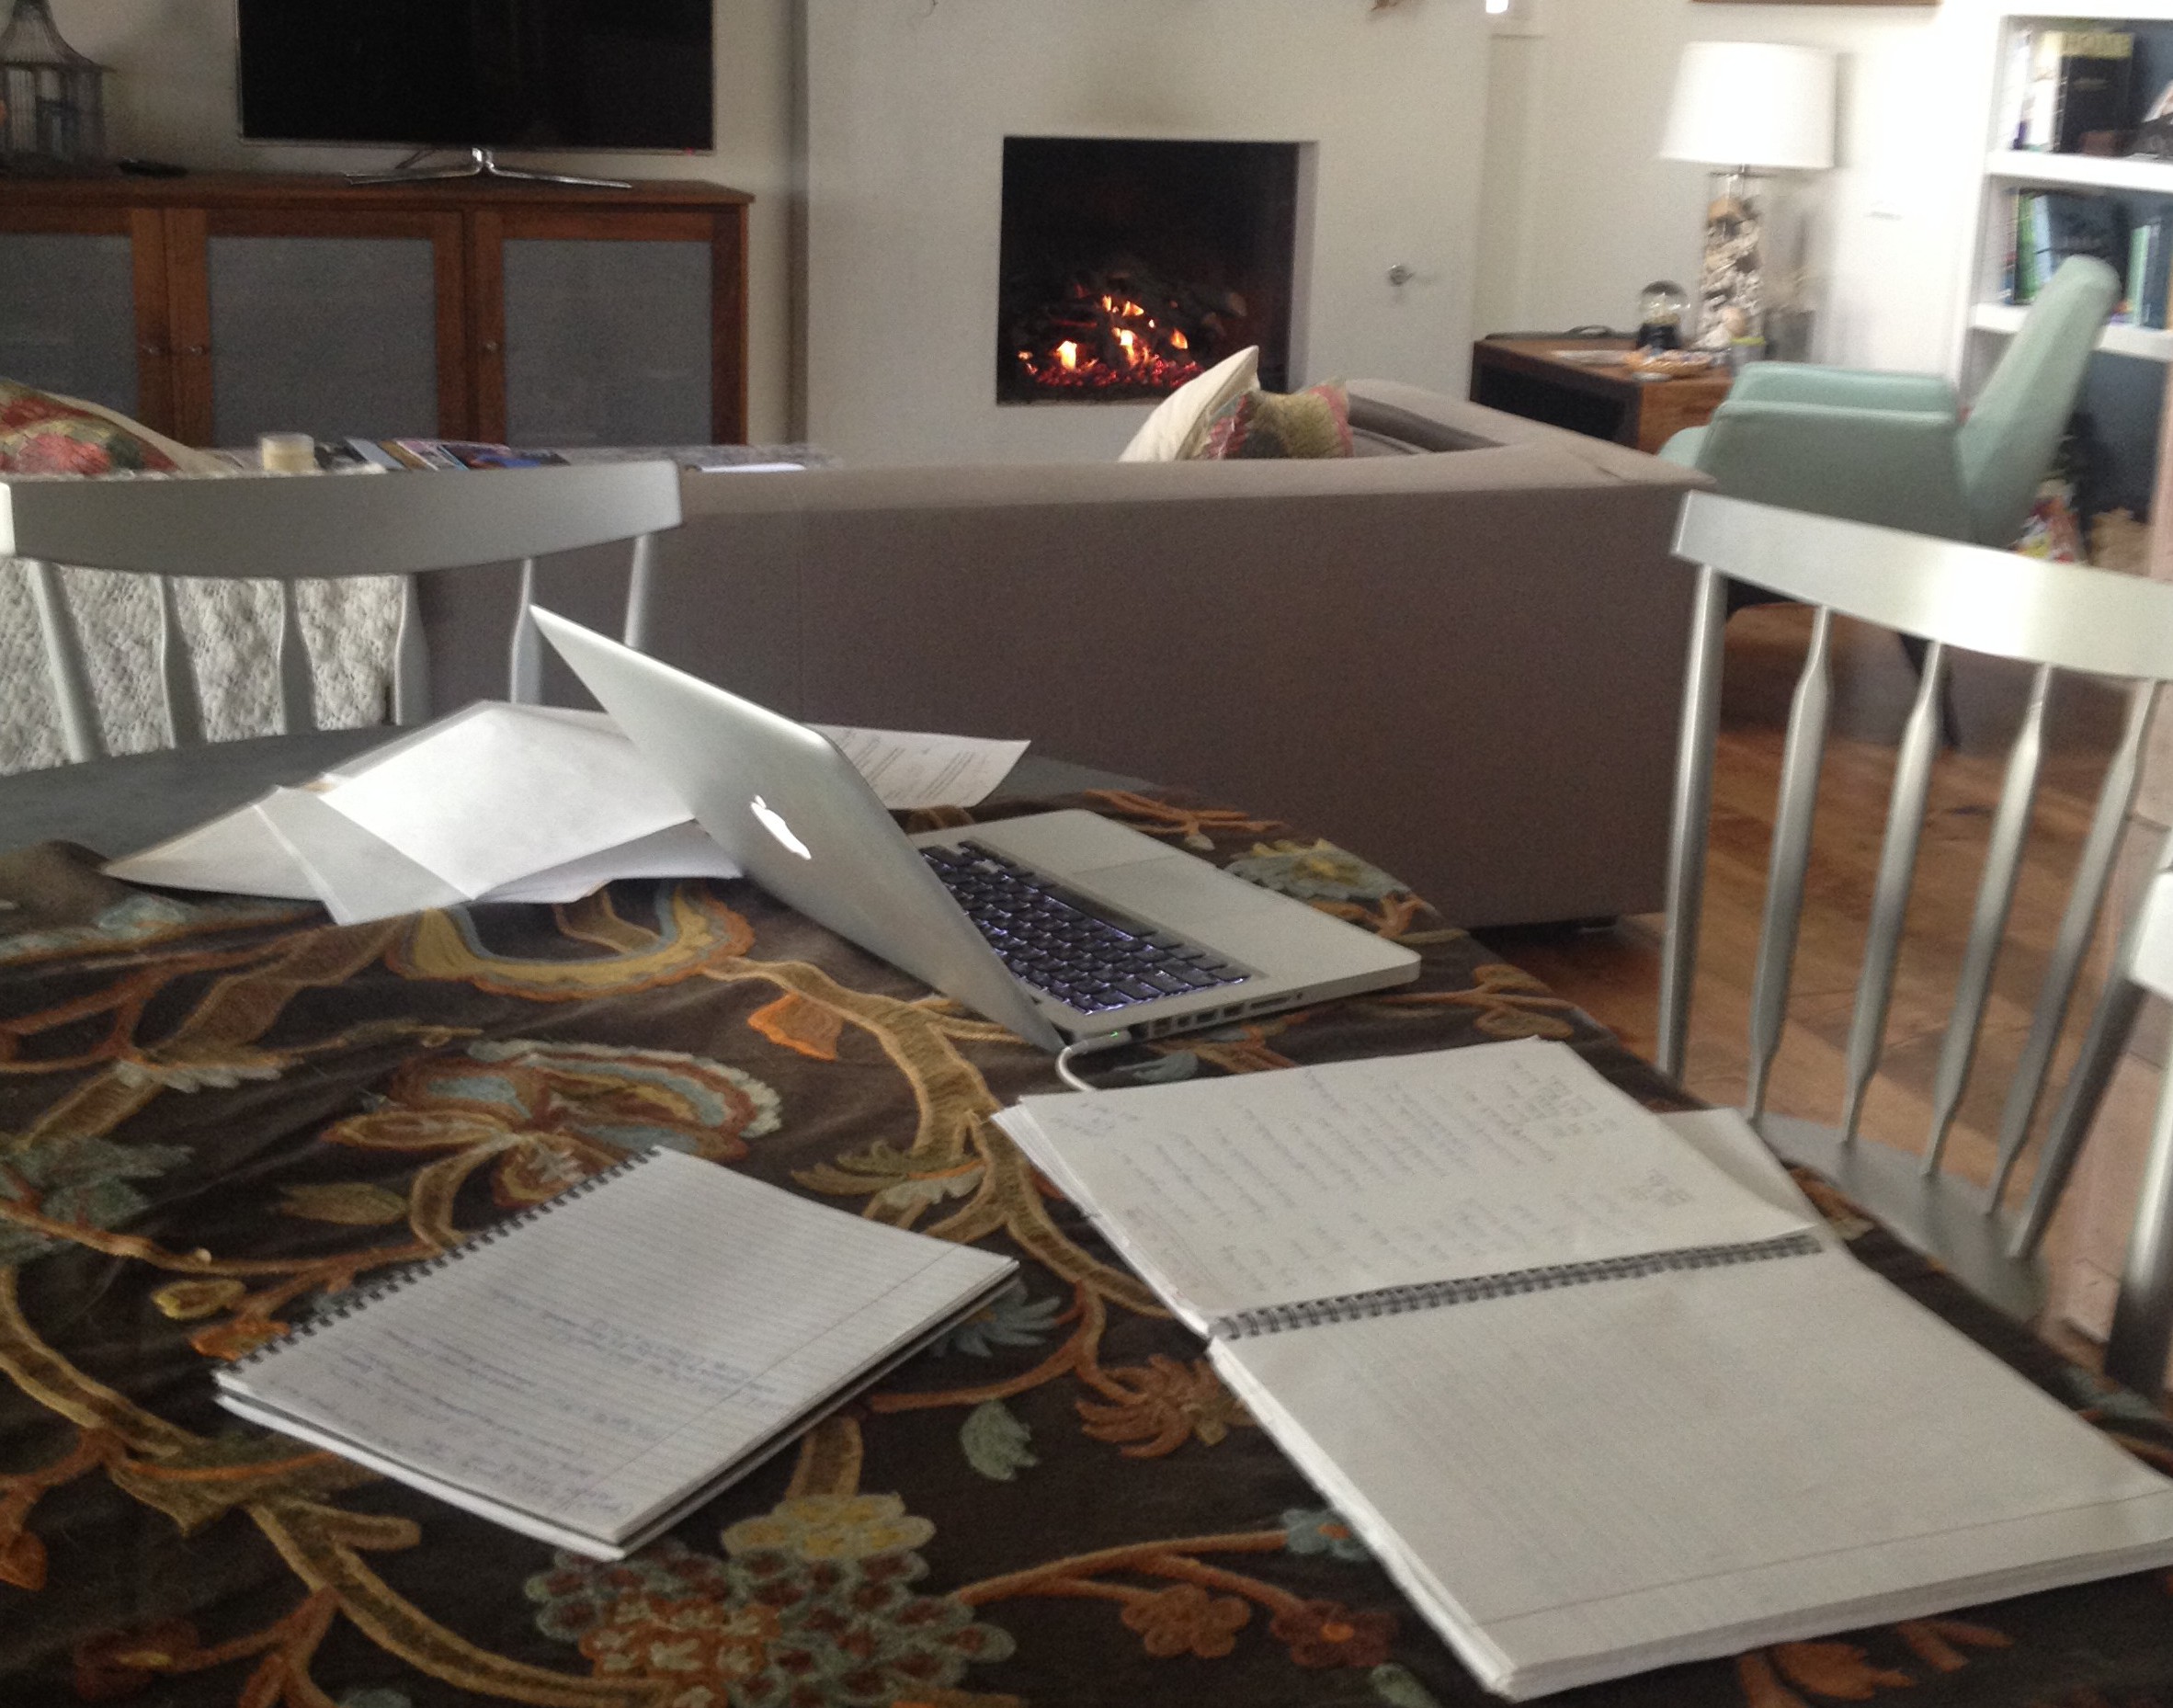 Laptop and notes at table in front of lit fireplace.